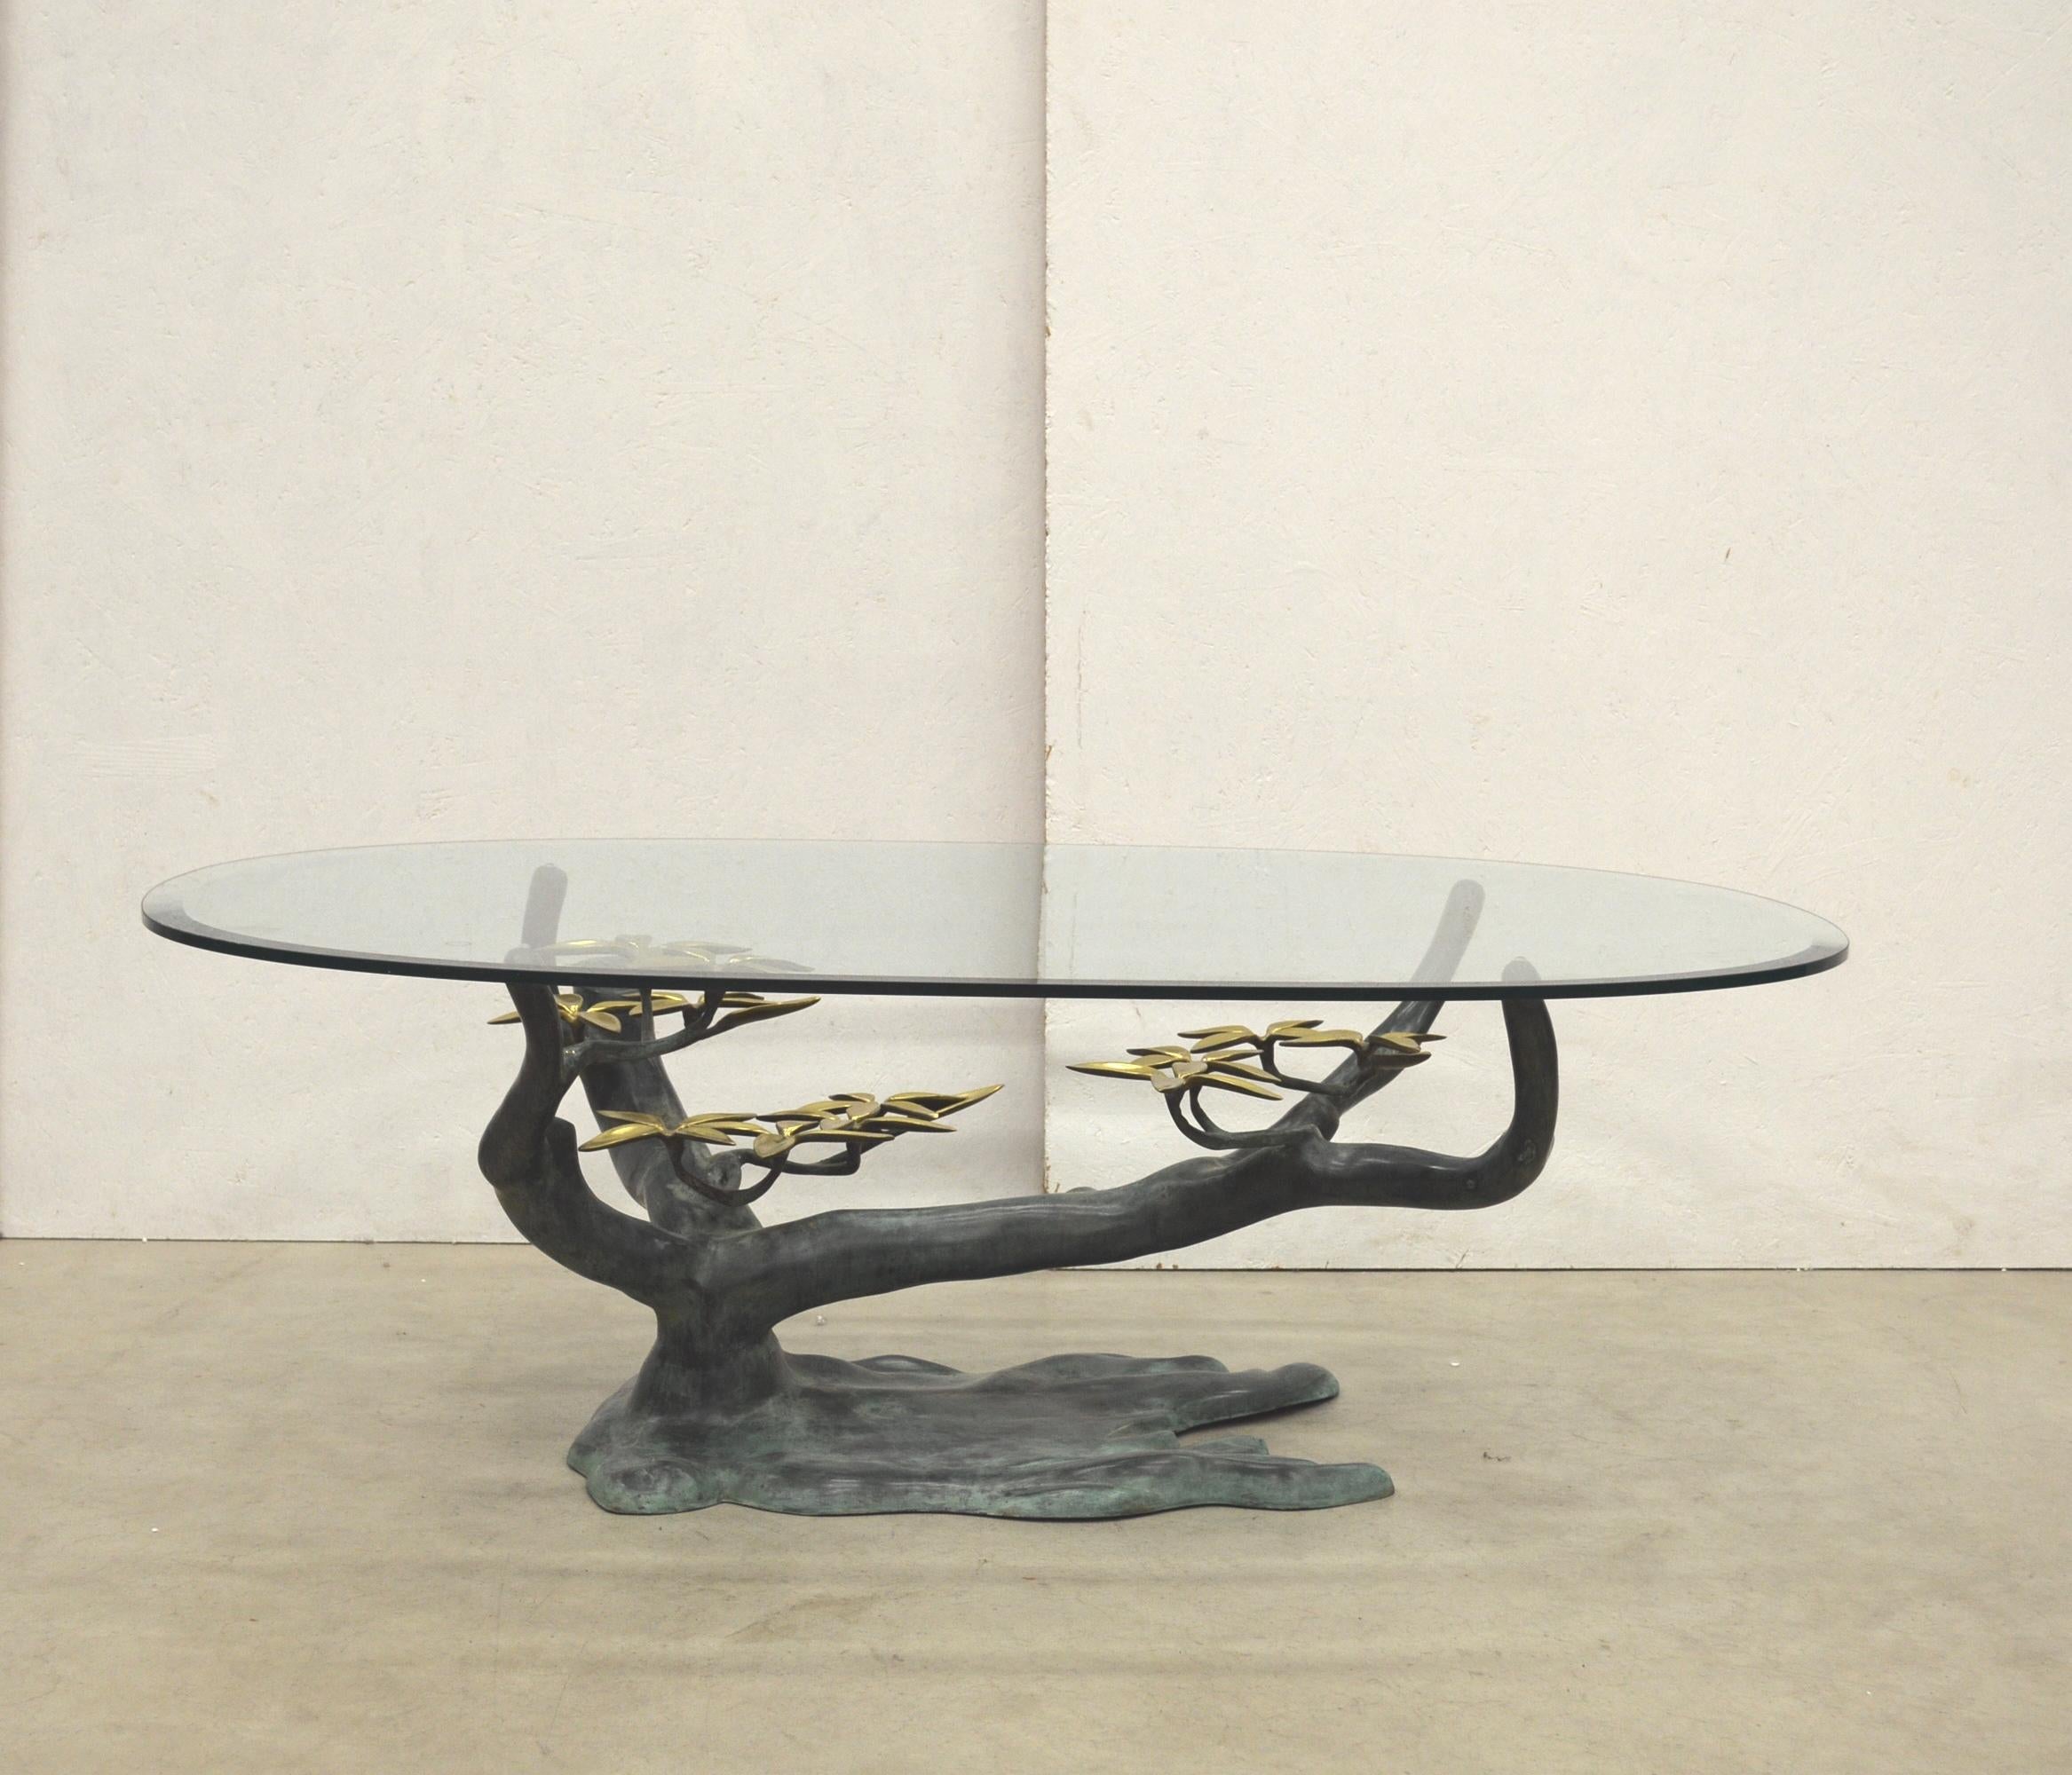 Rare Bonsai tree coffee table made by Willy Daro, Belgium 1970s.
Sculptural base with fine sanded glass top. Decorative floral elements made by brass with a wonderful patina.

Thick and fine glass top which has some very light scratches but still